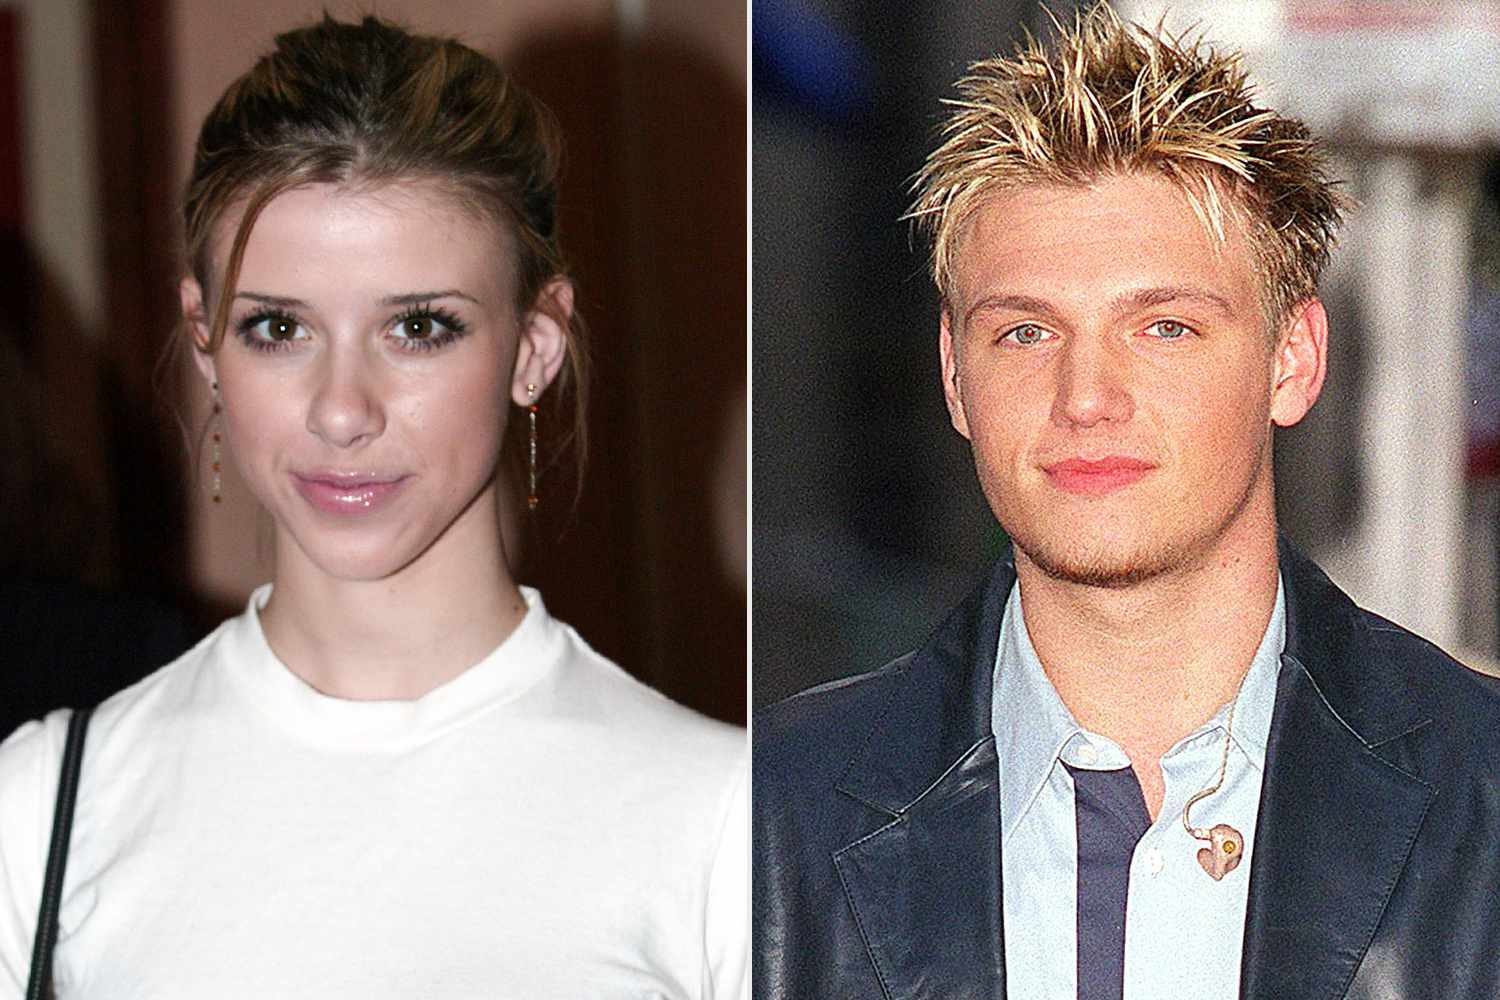 Dream singer Melissa Schuman alleges she was pressured into duet with Nick Carter after he raped her